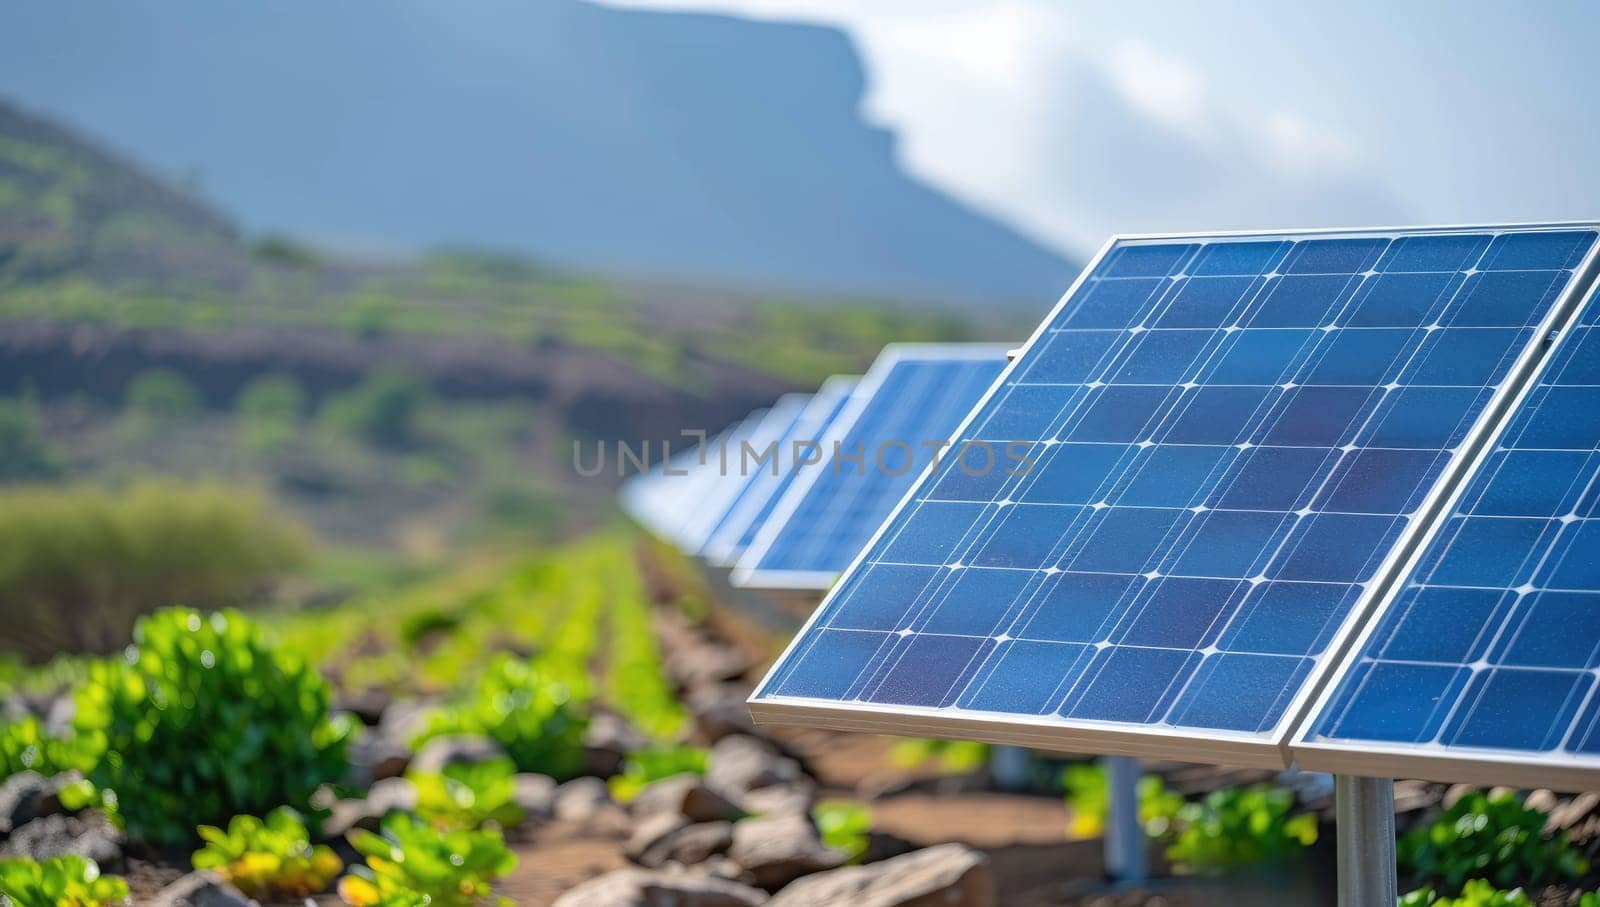 Solar panels generating power in a field with mountains in the background